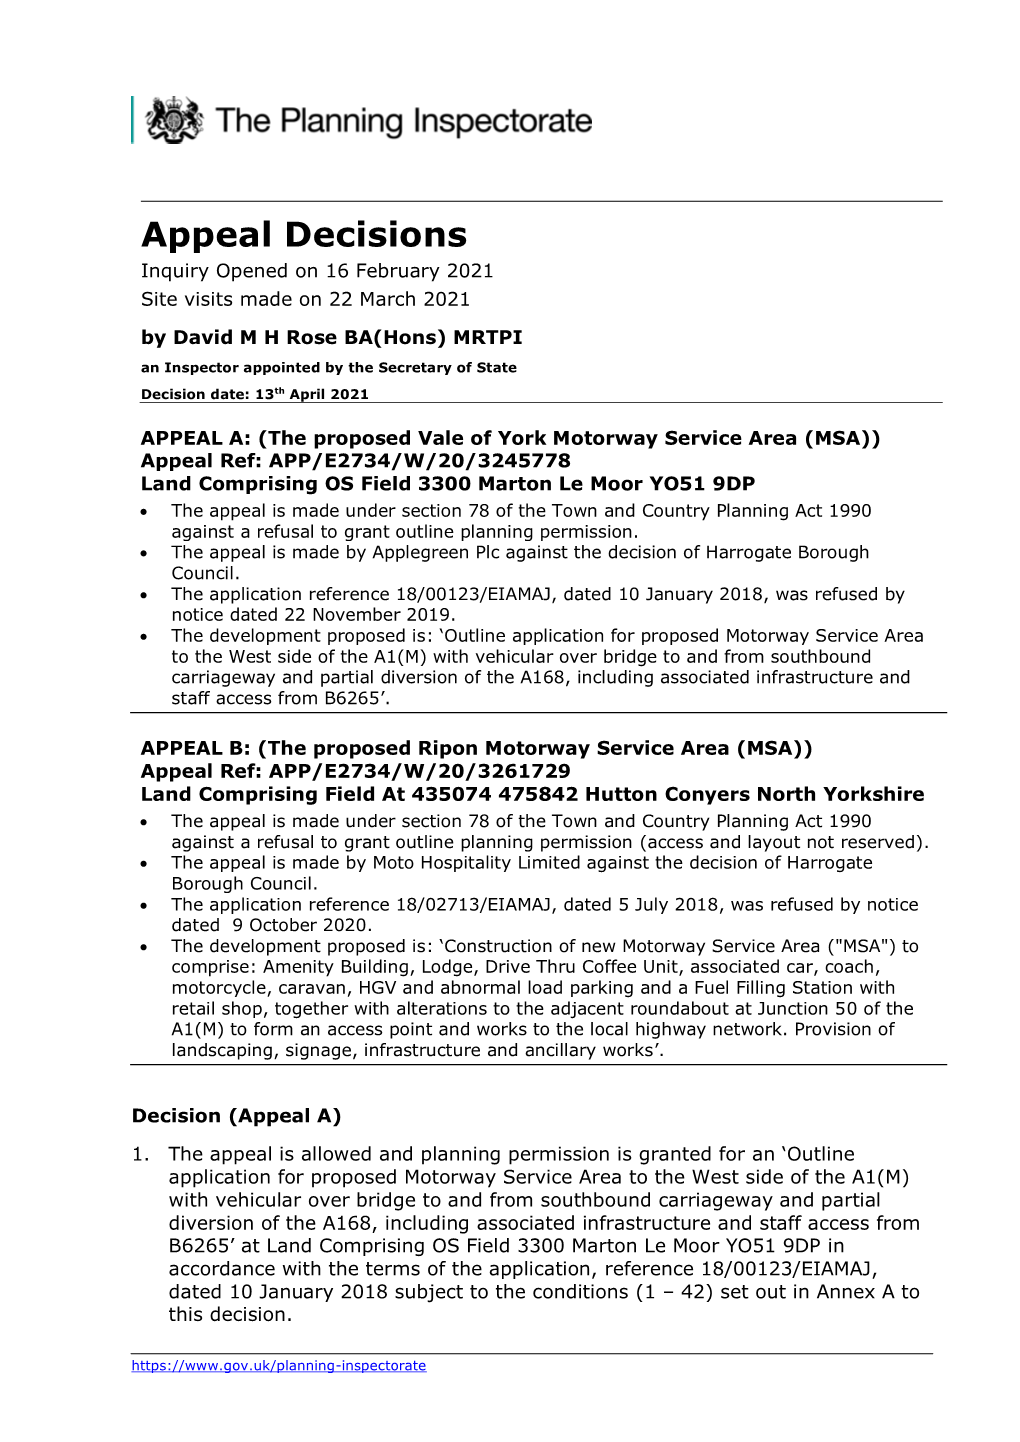 Appeal Decisions Inquiry Opened on 16 February 2021 Site Visits Made on 22 March 2021